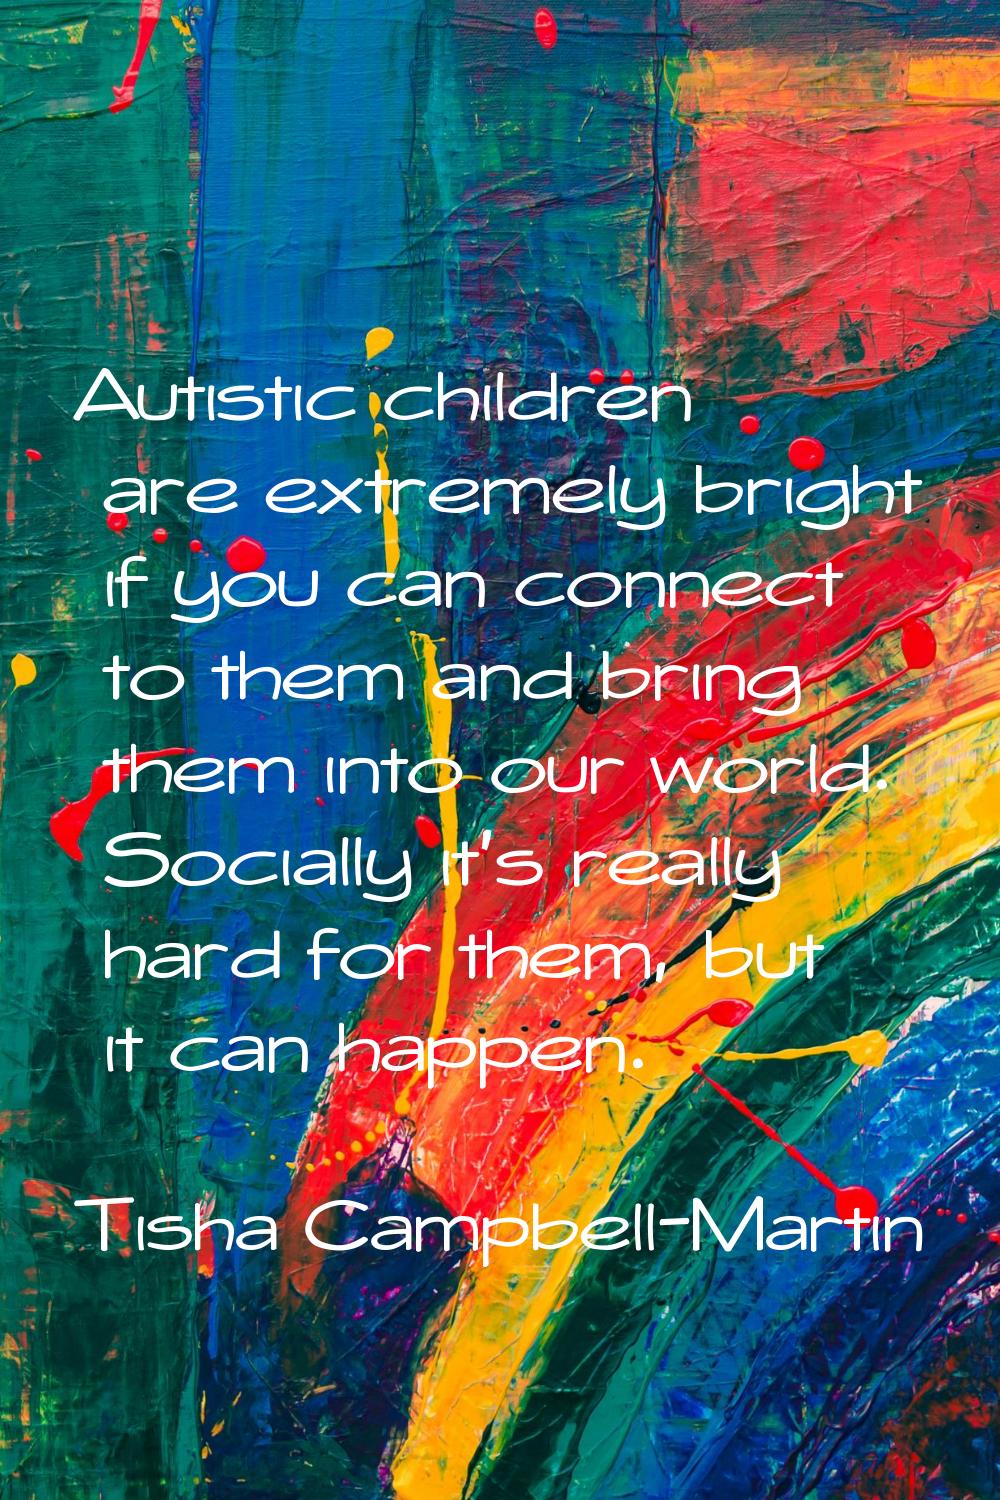 Autistic children are extremely bright if you can connect to them and bring them into our world. So